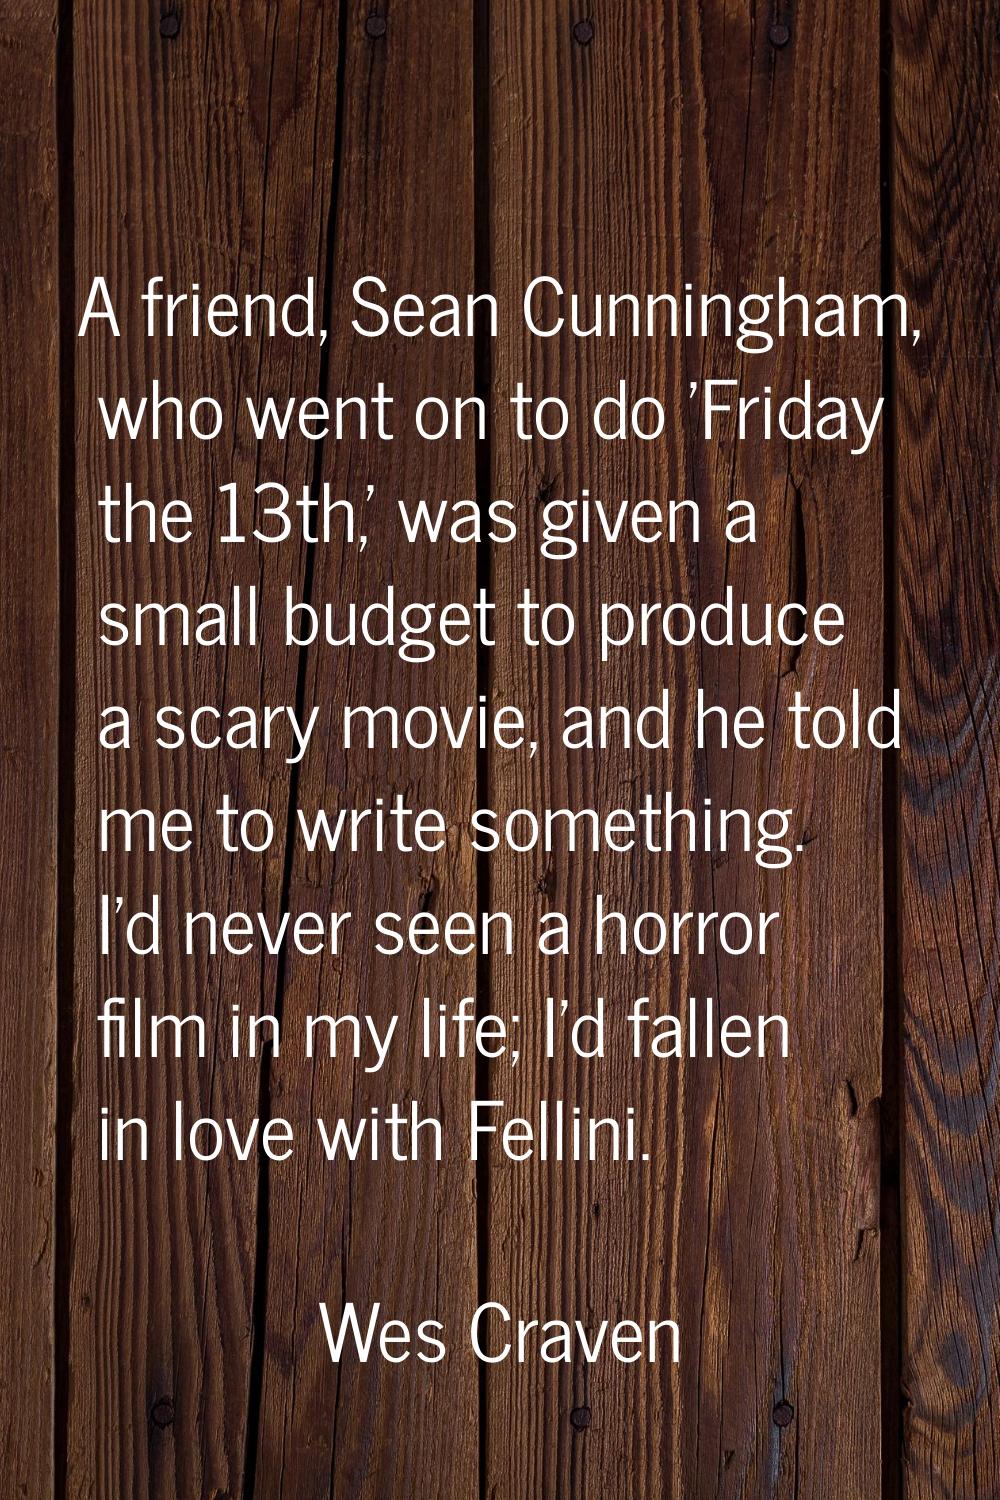 A friend, Sean Cunningham, who went on to do 'Friday the 13th,' was given a small budget to produce